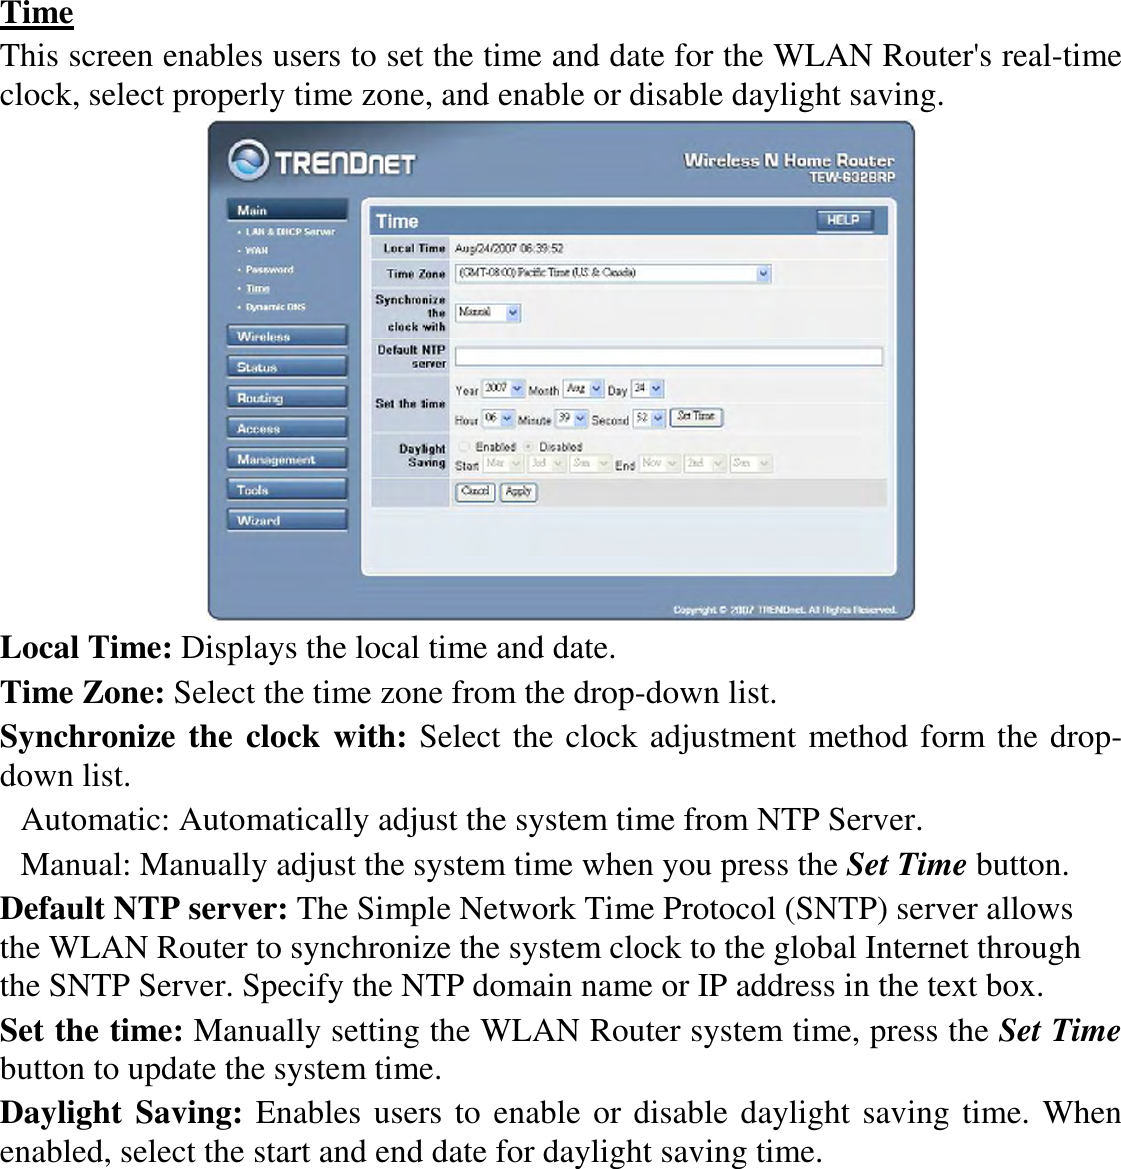 Time This screen enables users to set the time and date for the WLAN Router&apos;s real-time clock, select properly time zone, and enable or disable daylight saving.  Local Time: Displays the local time and date. Time Zone: Select the time zone from the drop-down list. Synchronize the clock with: Select the clock adjustment method form the drop-down list. Automatic: Automatically adjust the system time from NTP Server. Manual: Manually adjust the system time when you press the Set Time button. Default NTP server: The Simple Network Time Protocol (SNTP) server allows the WLAN Router to synchronize the system clock to the global Internet through the SNTP Server. Specify the NTP domain name or IP address in the text box. Set the time: Manually setting the WLAN Router system time, press the Set Time button to update the system time. Daylight  Saving: Enables users to enable or disable daylight saving time. When enabled, select the start and end date for daylight saving time. 